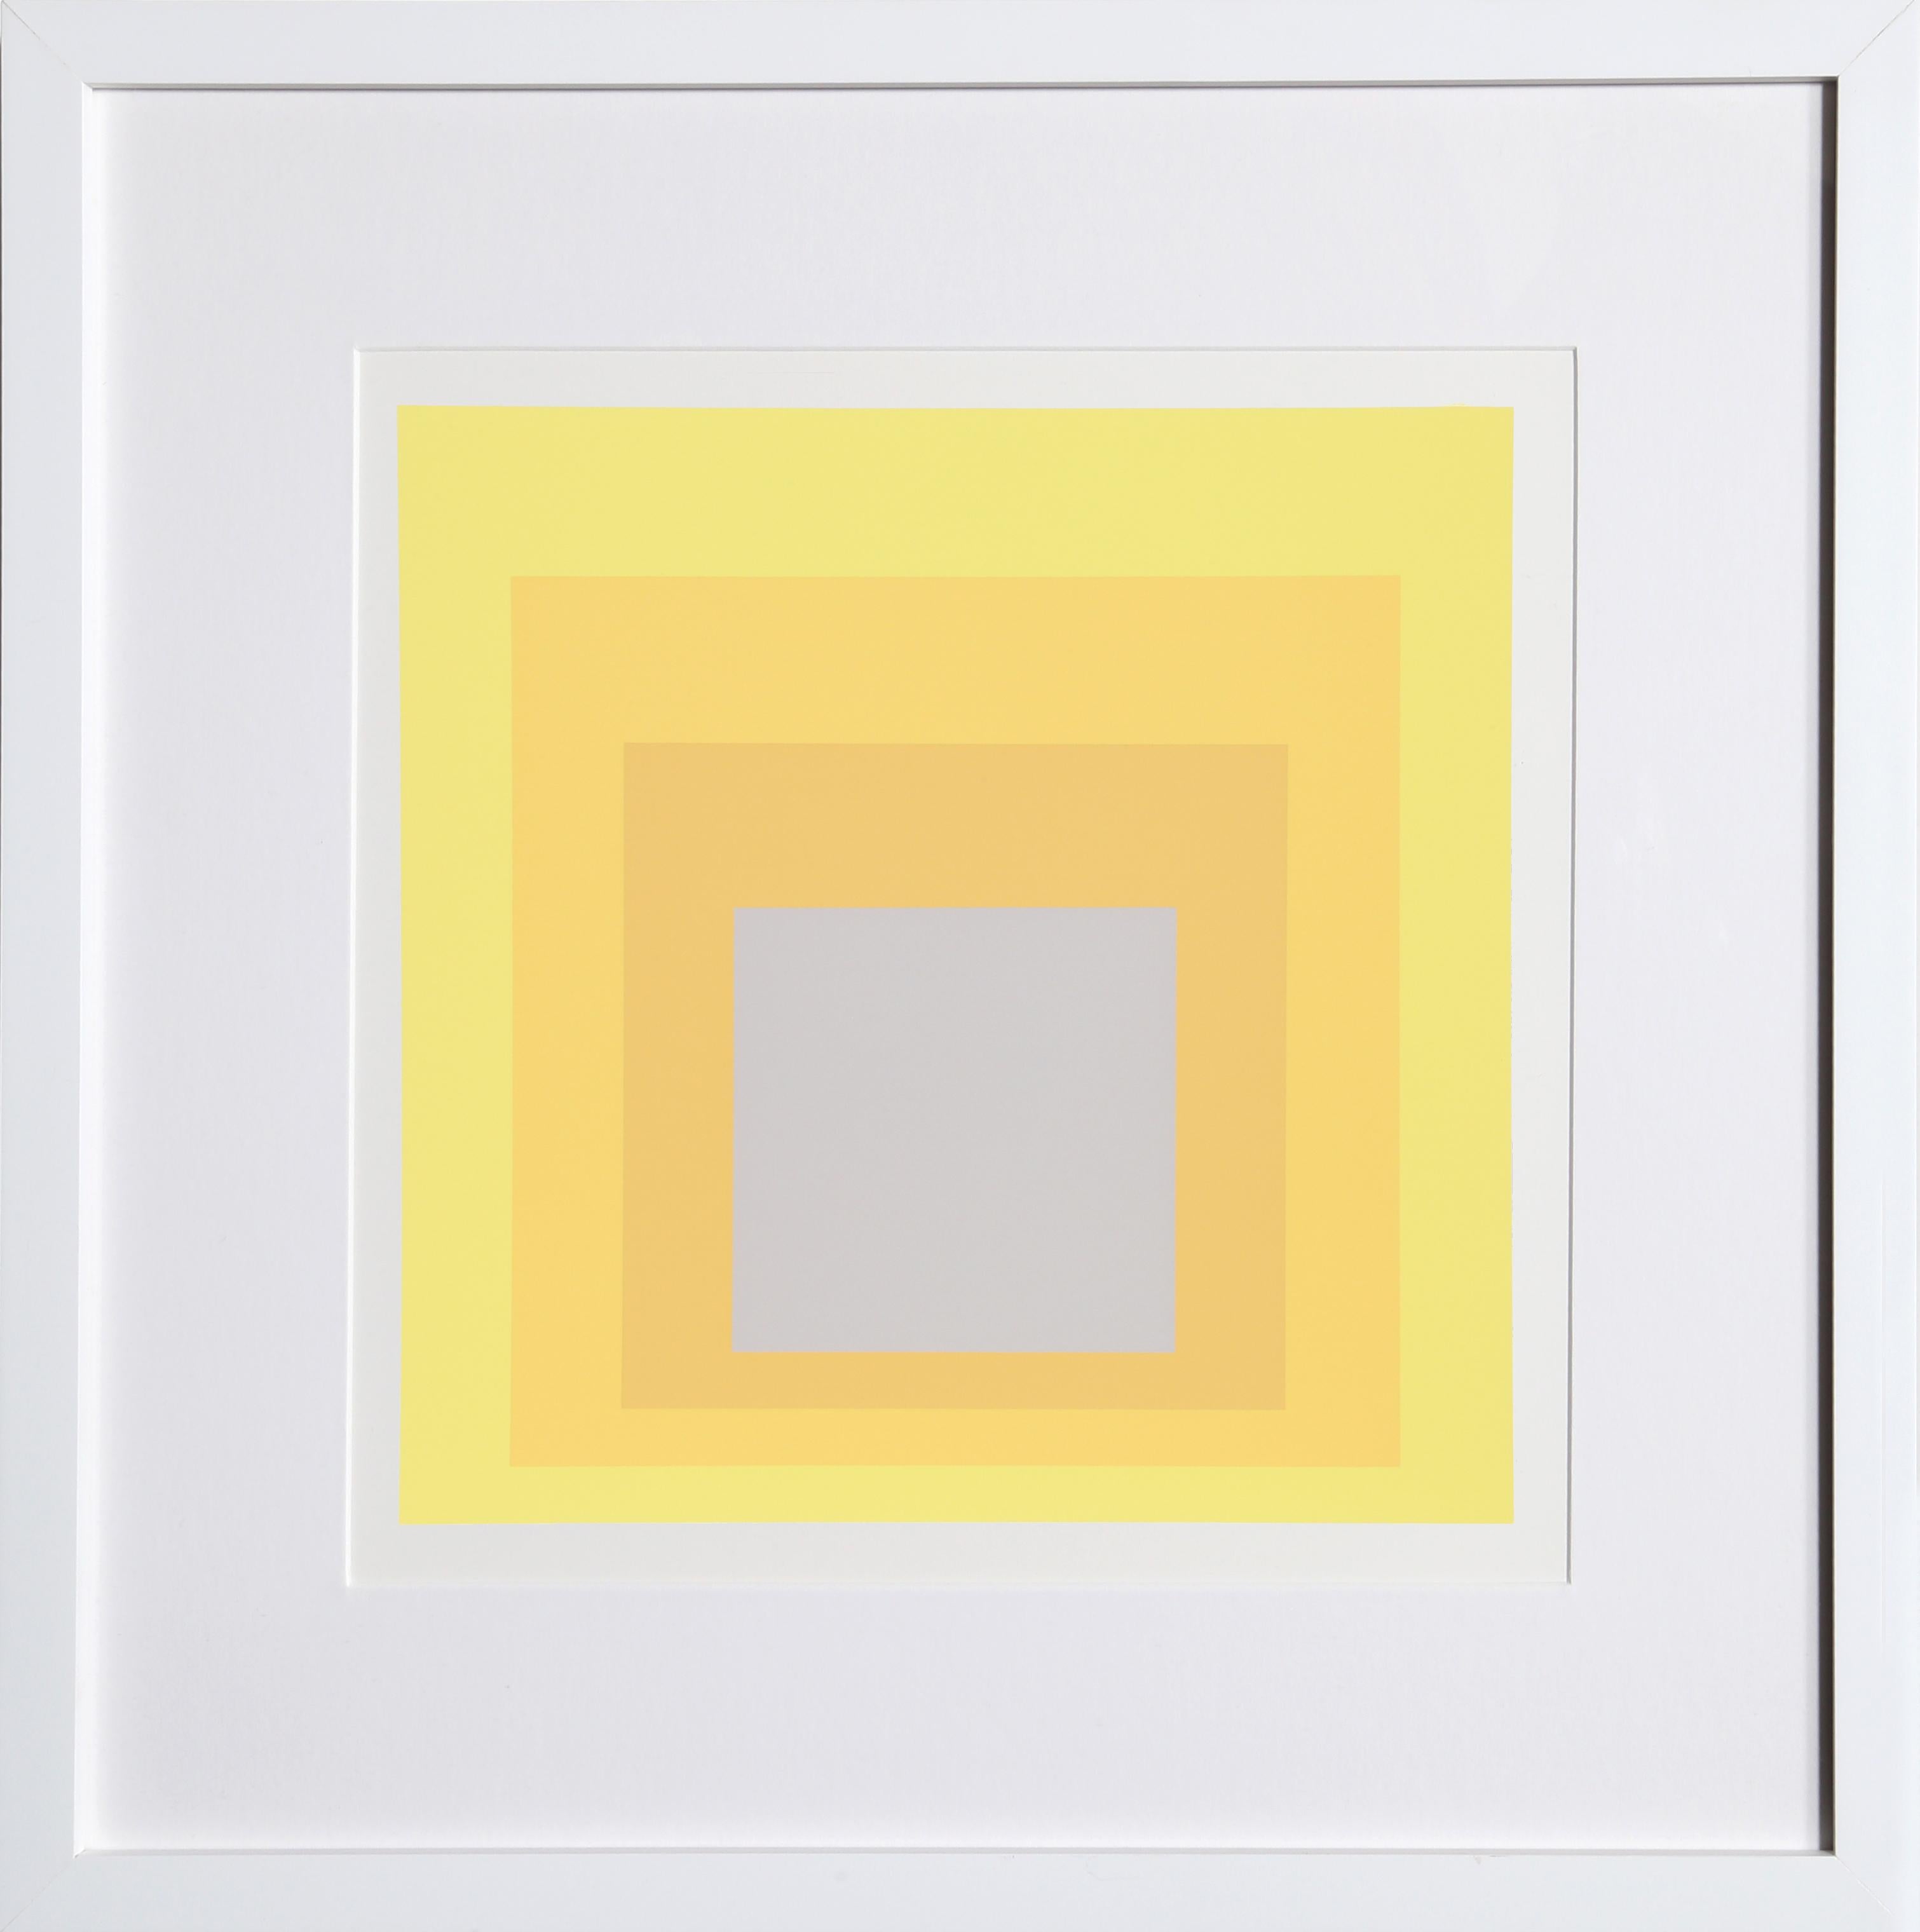 Josef Albers Abstract Print - Homage to the Square - P1, F19, I1